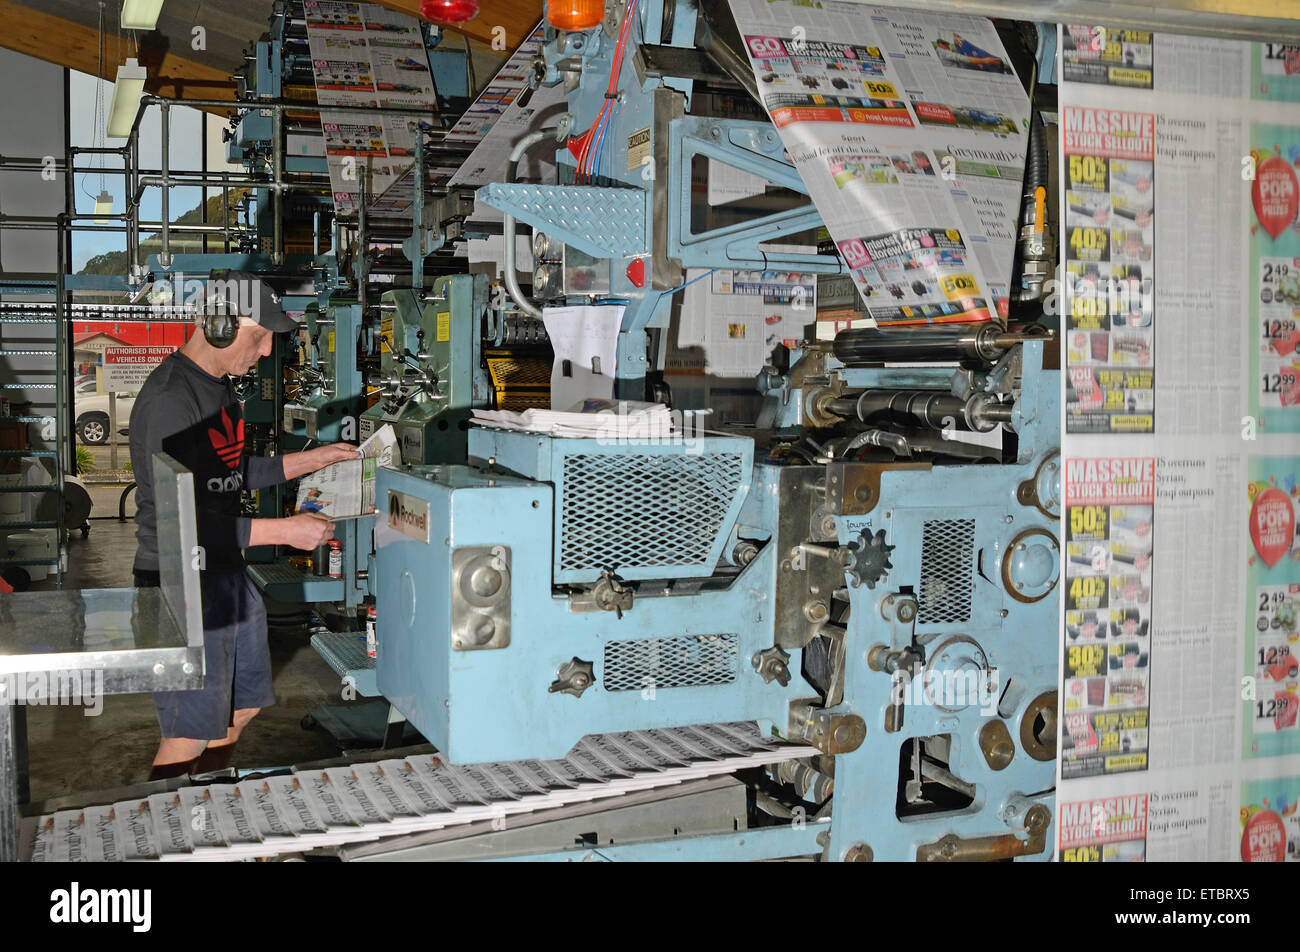 GREYMOUTH, NEW ZEALAND, MAY 22, 2015:  An unidentified printer checks the quality of his workmanship while printing a newspaper Stock Photo